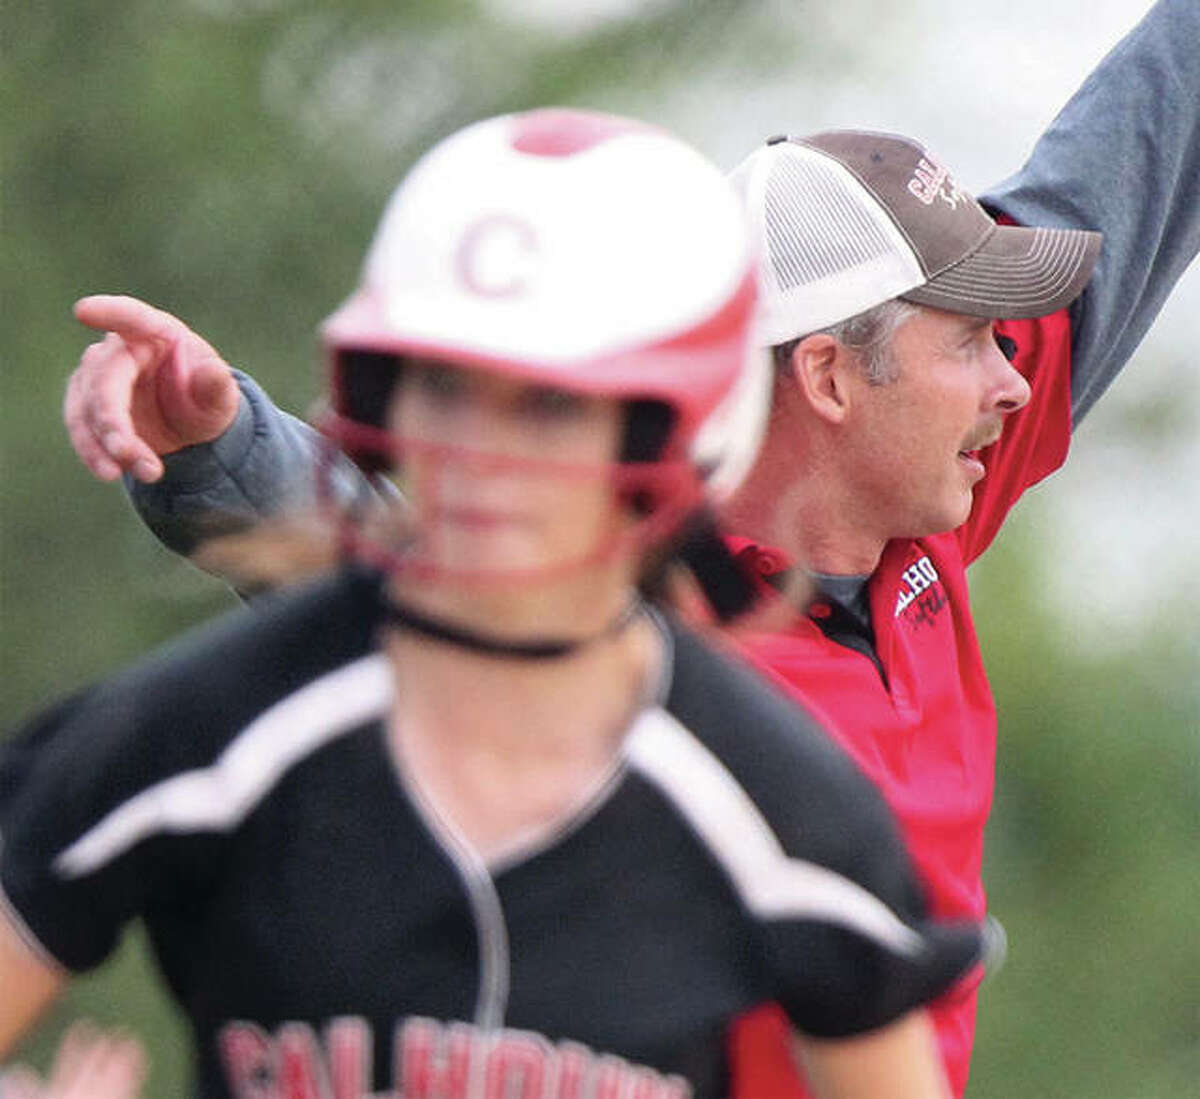 Calhoun coach Matt Baalman (right) sends one runner home while holding another at second base during a 2015 sectional victory in Mount Sterling. After winning back-to-back state titles in 2015-16, Calhoun added a Class 1A state runner-up trophy in 2017 to earn Baalman honors as Telegraph Small-Schools Softball Coach of the Year.